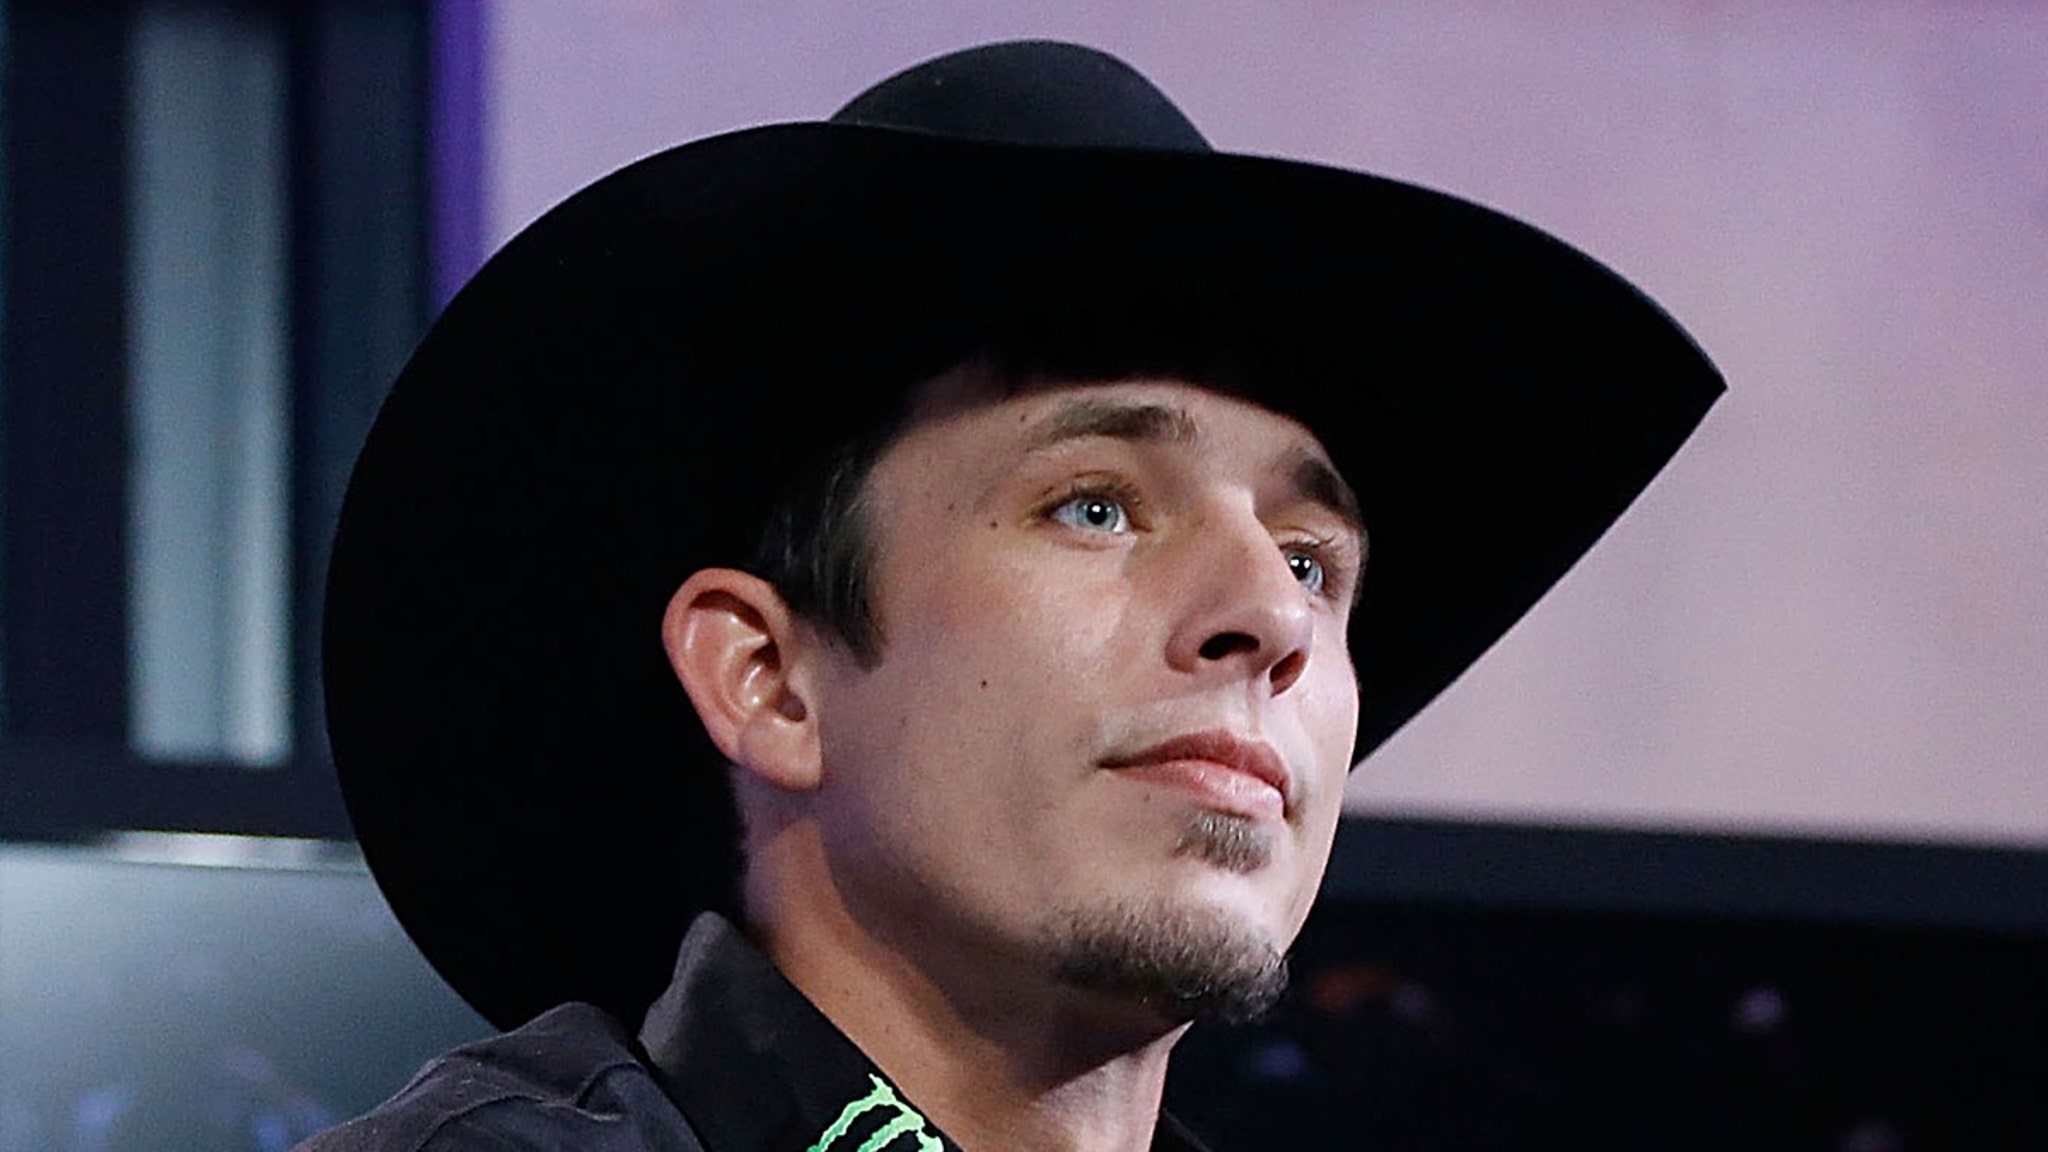 Bull Riding Champ J.B. Mauney Retires After Breaking Neck In Accident